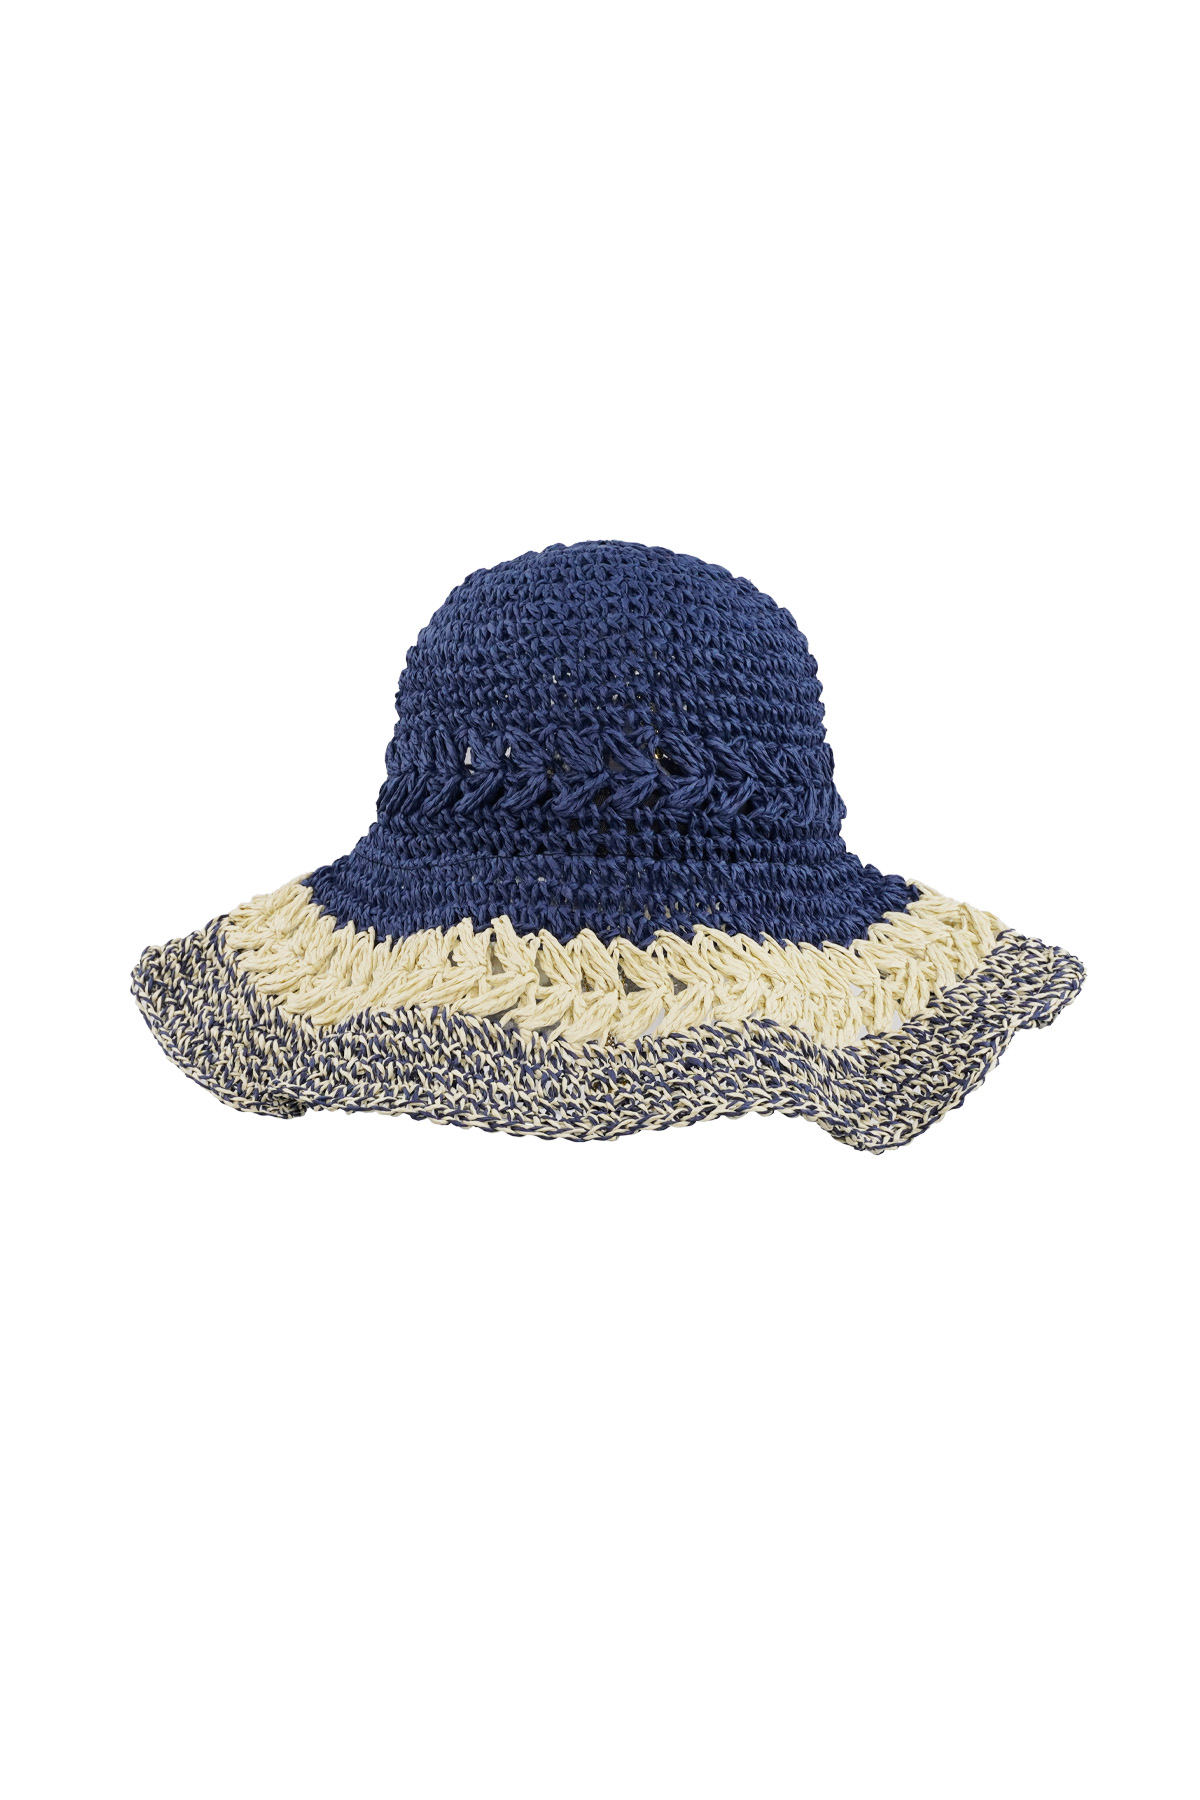 Braided hat with layers - navy blue